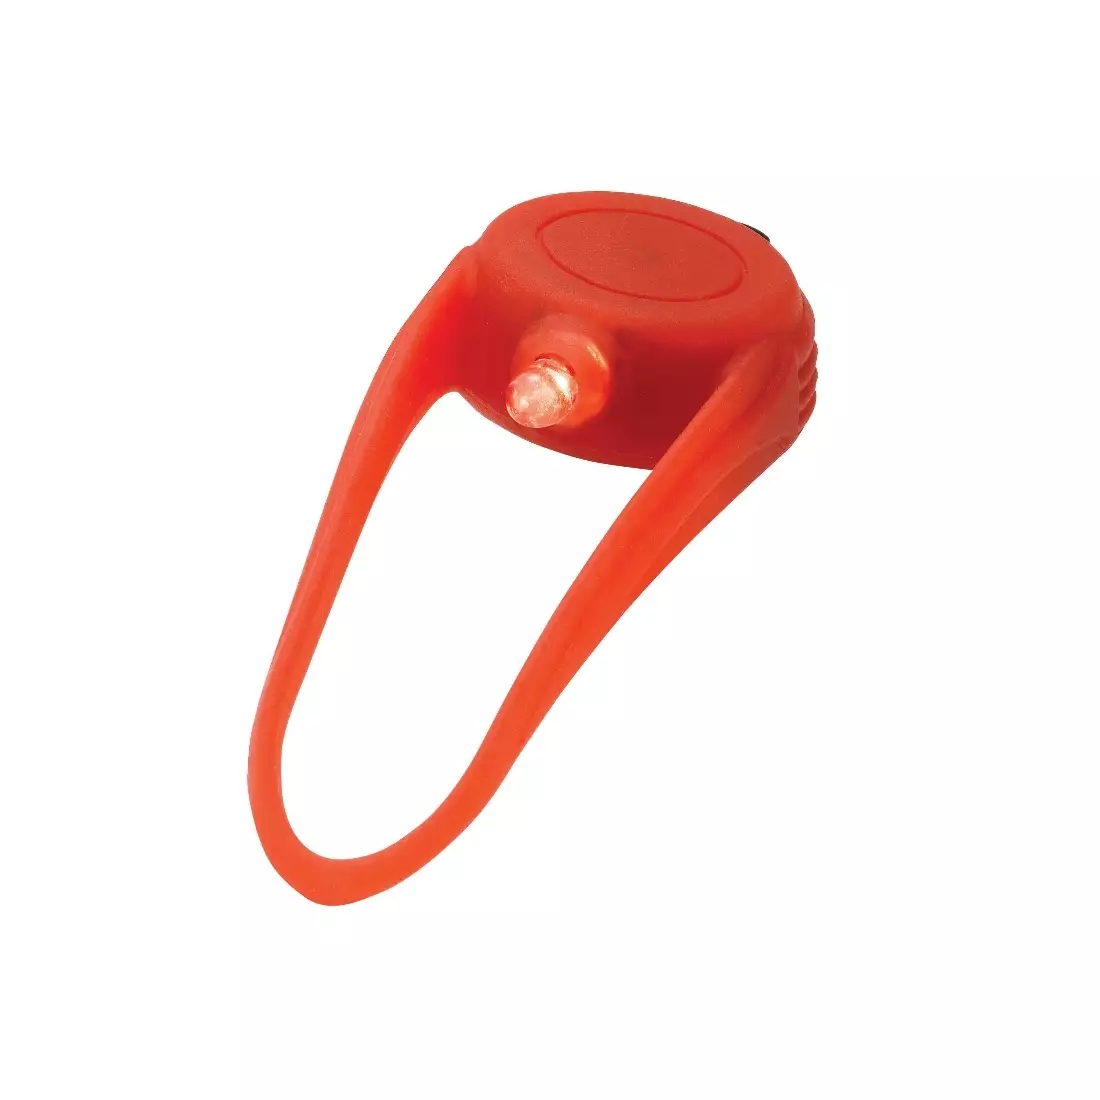 TORCH Tail Bright Flex - rear light - color: Red